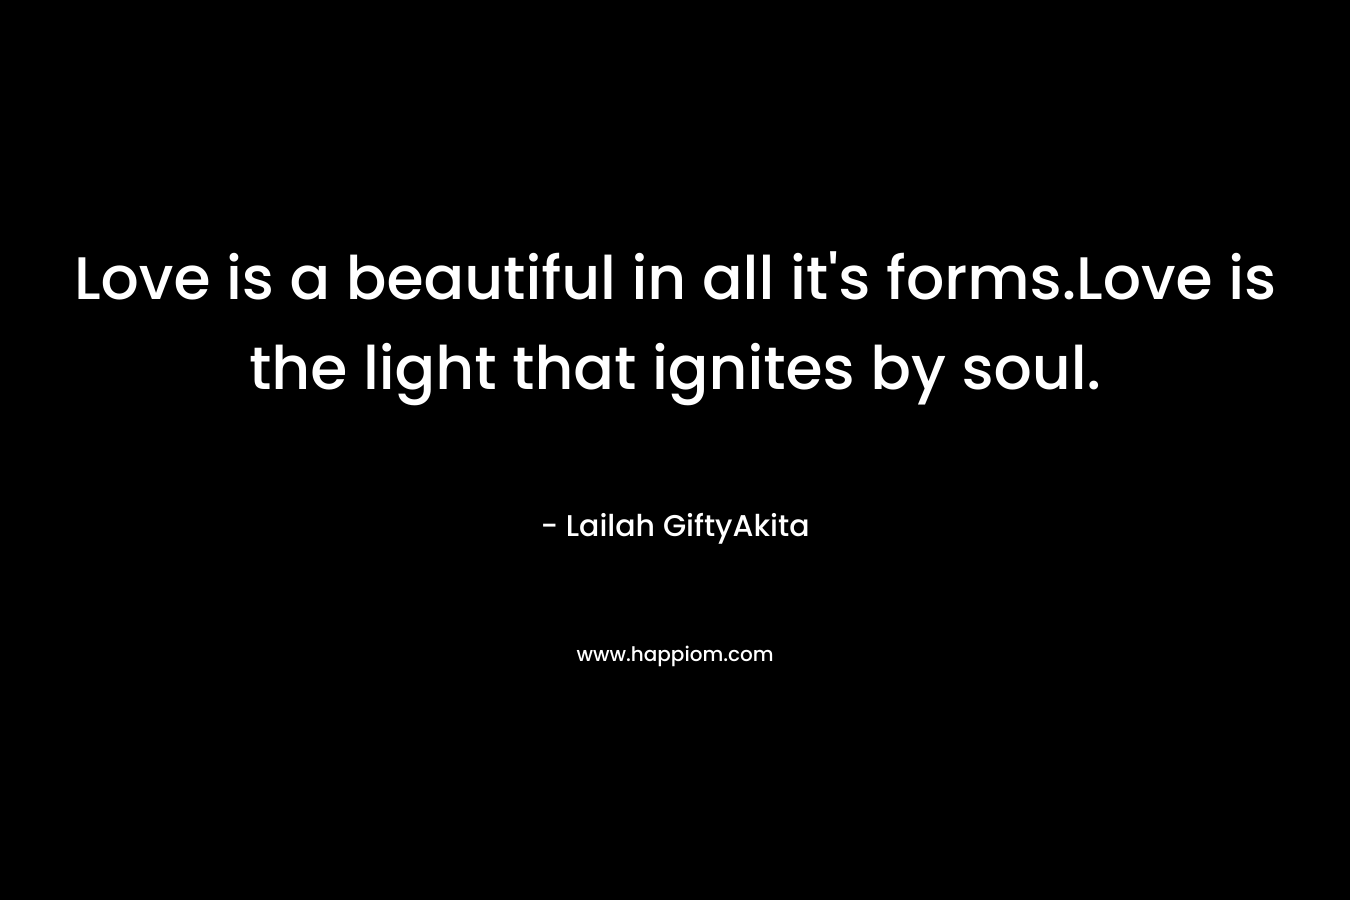 Love is a beautiful in all it's forms.Love is the light that ignites by soul.